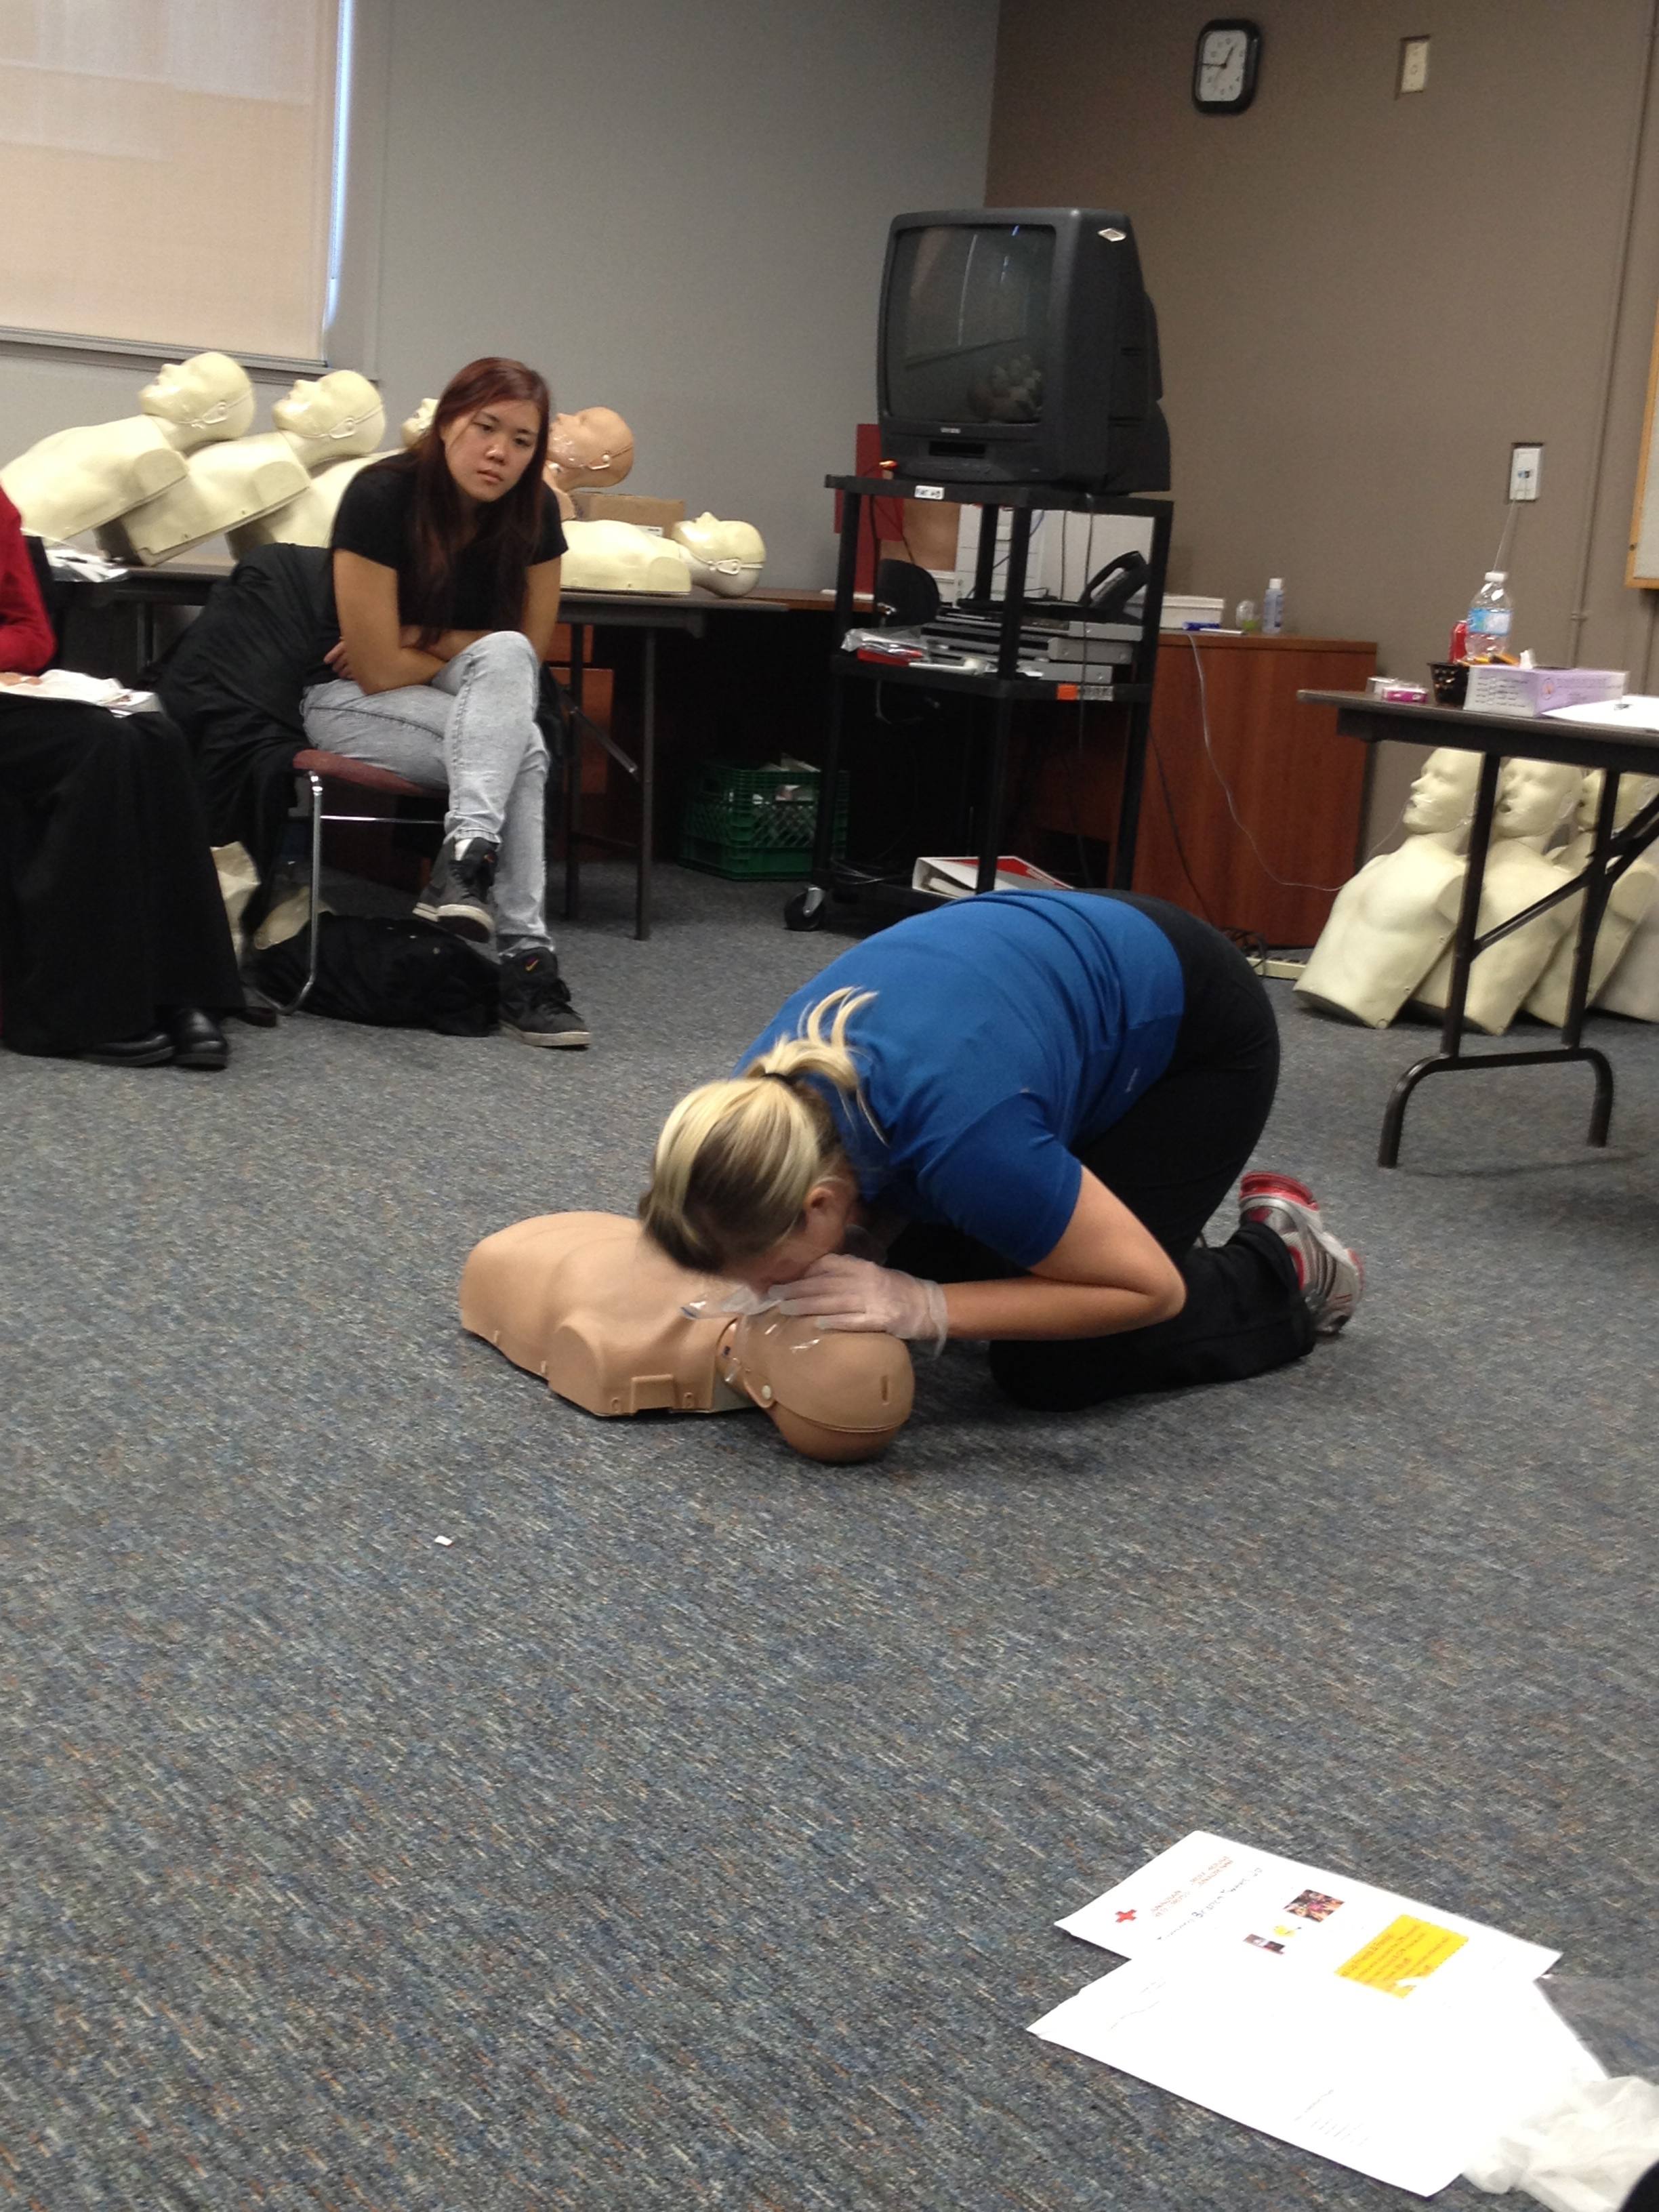 CPR on our dummies